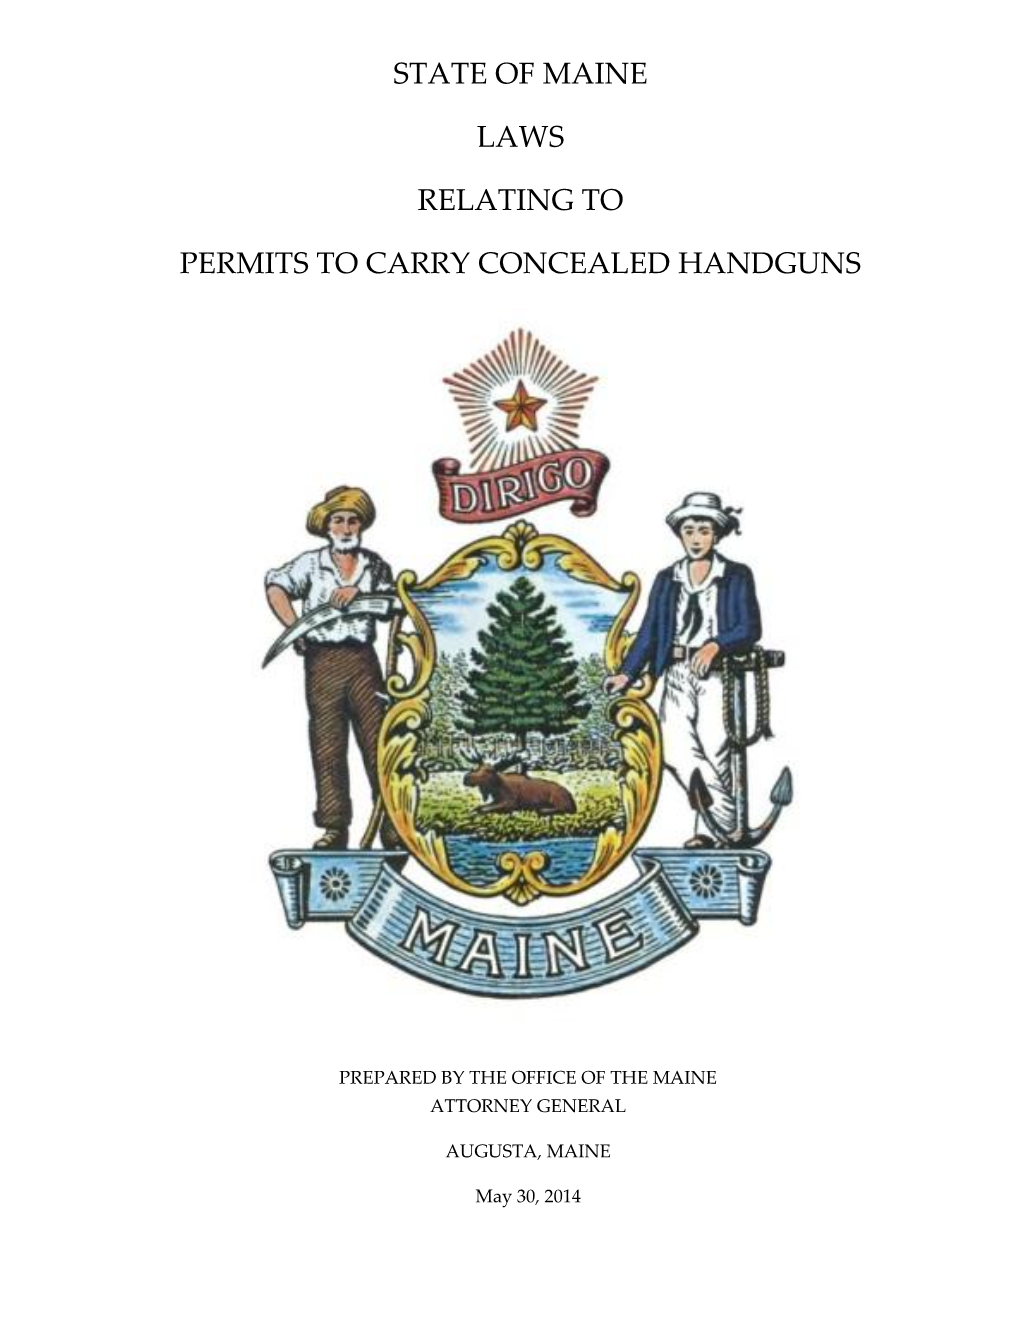 State of Maine Laws Relating to Permits to Carry